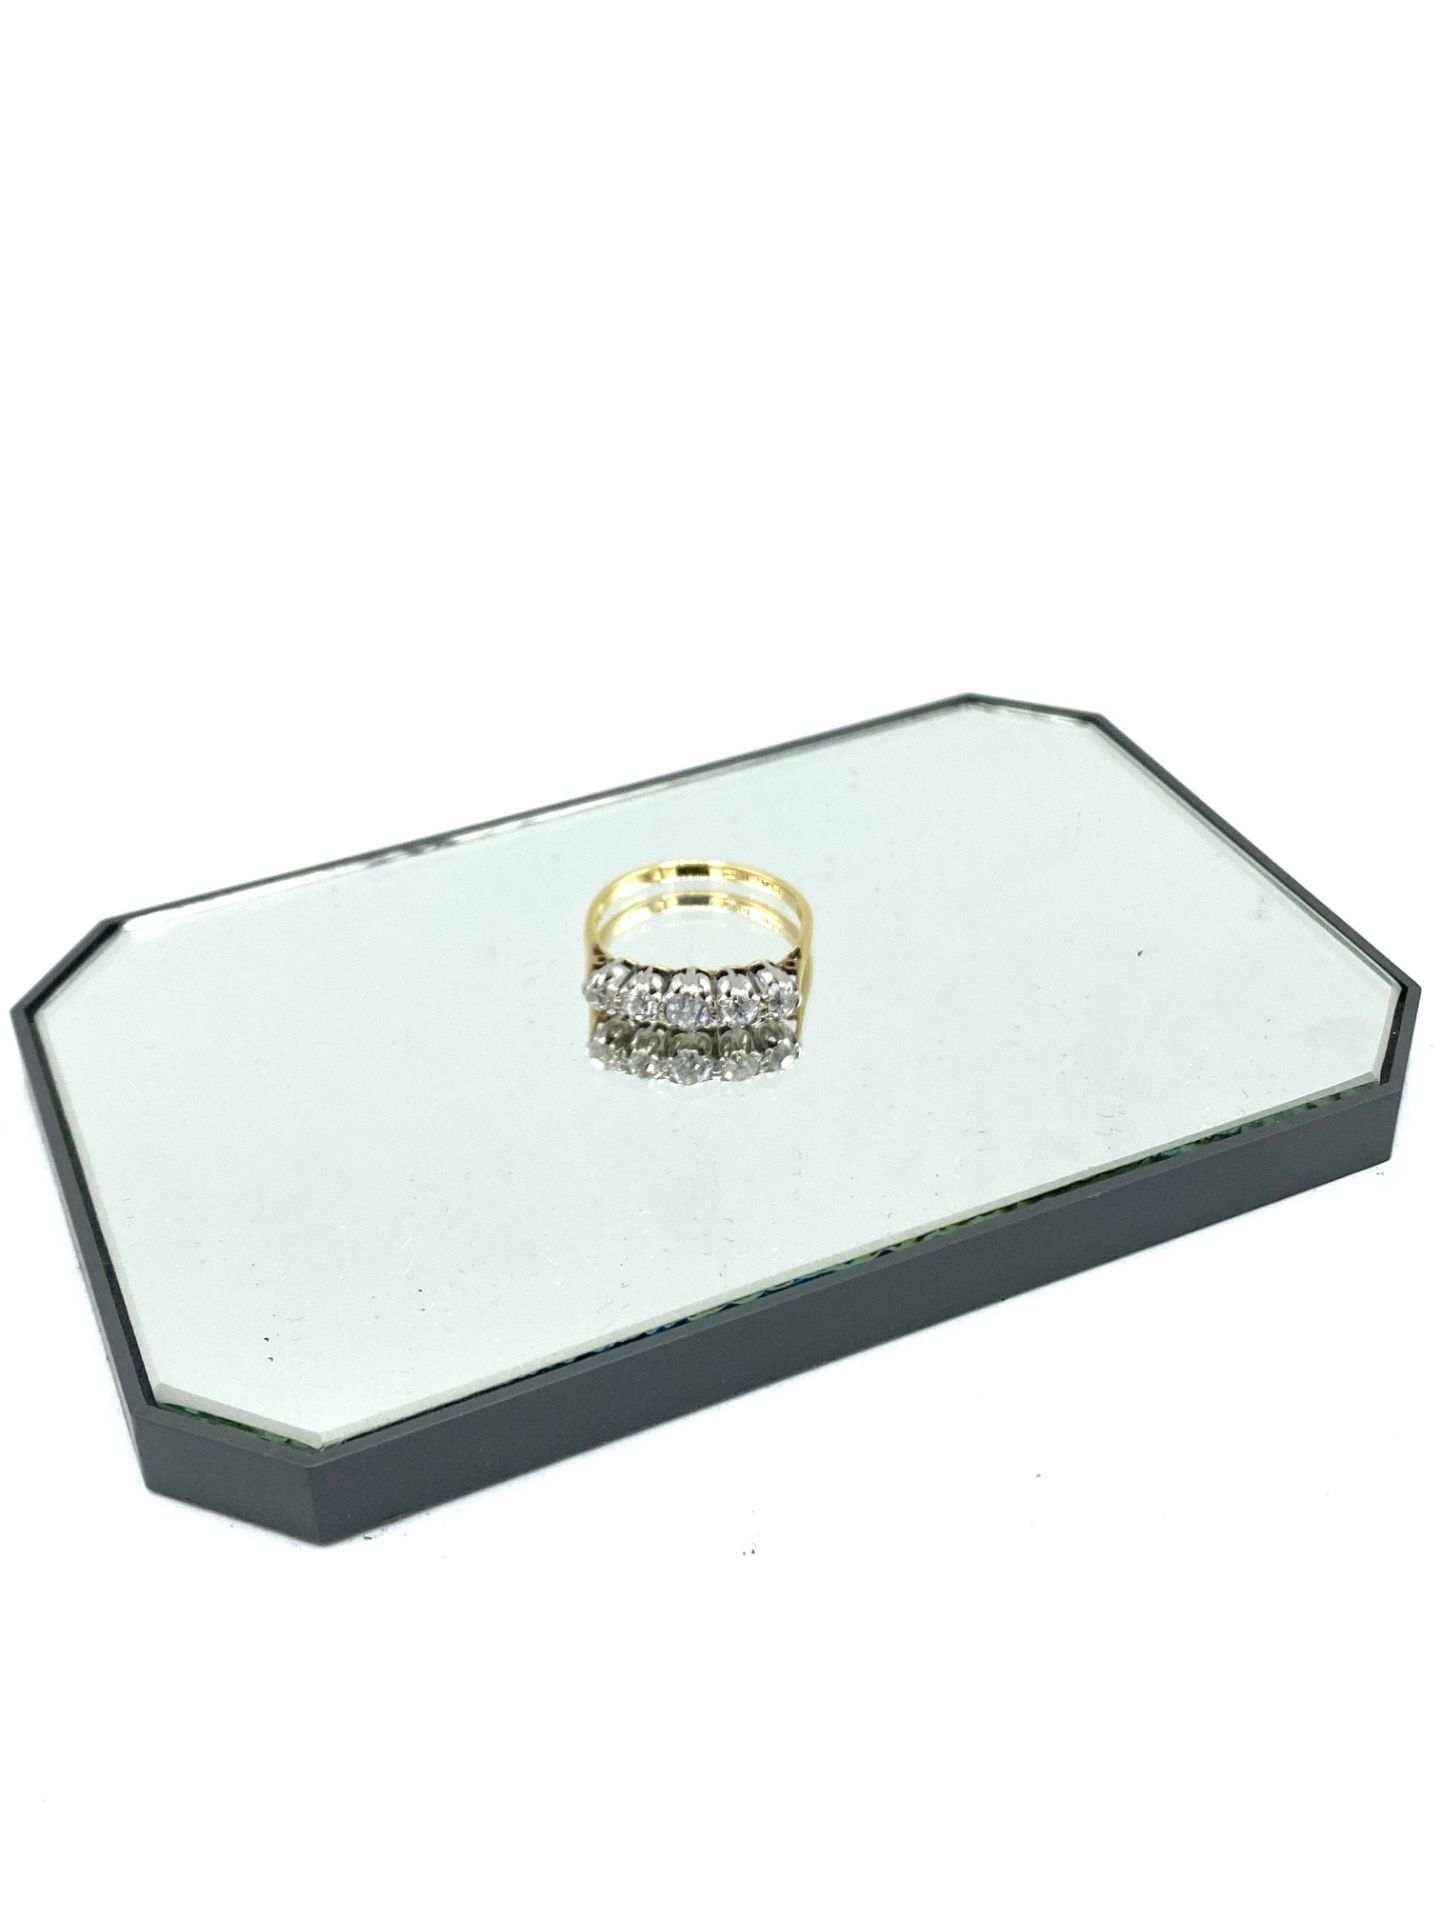 18ct gold and platinum five diamond ring - Image 7 of 9